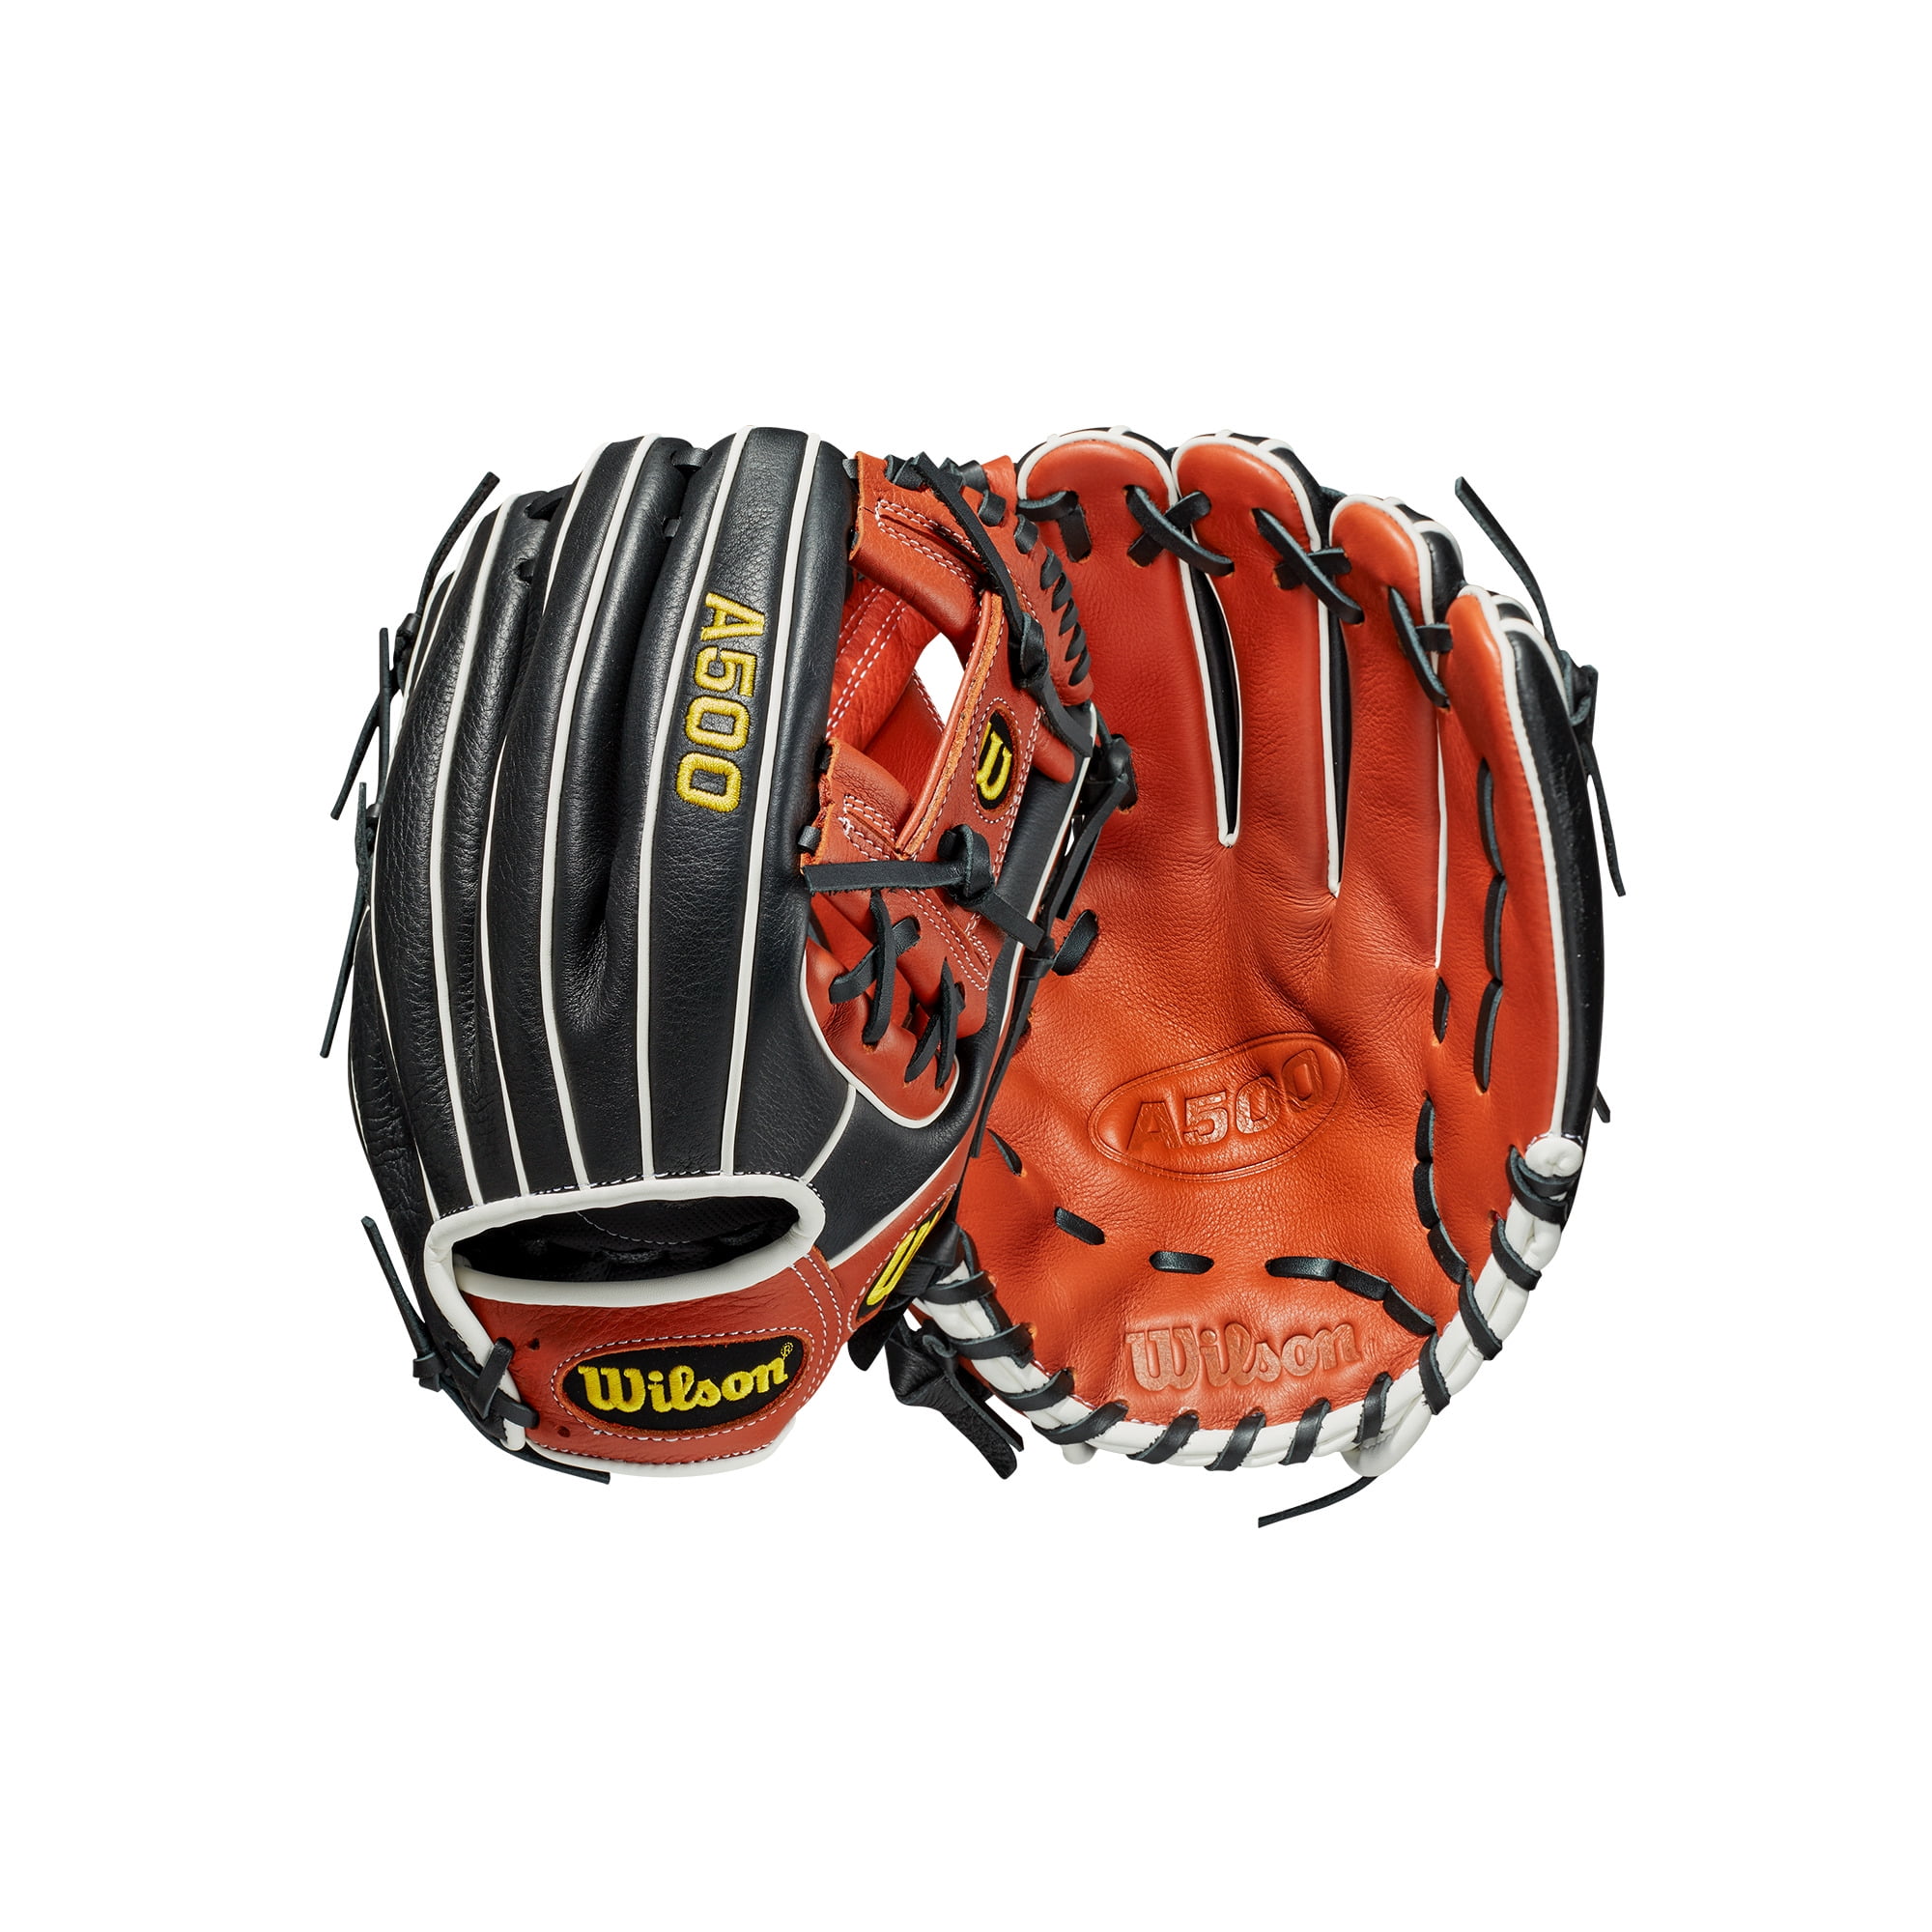 Rawlings Players Series Youth Tball/Baseball Glove Ages 5-7 Dark 10" 